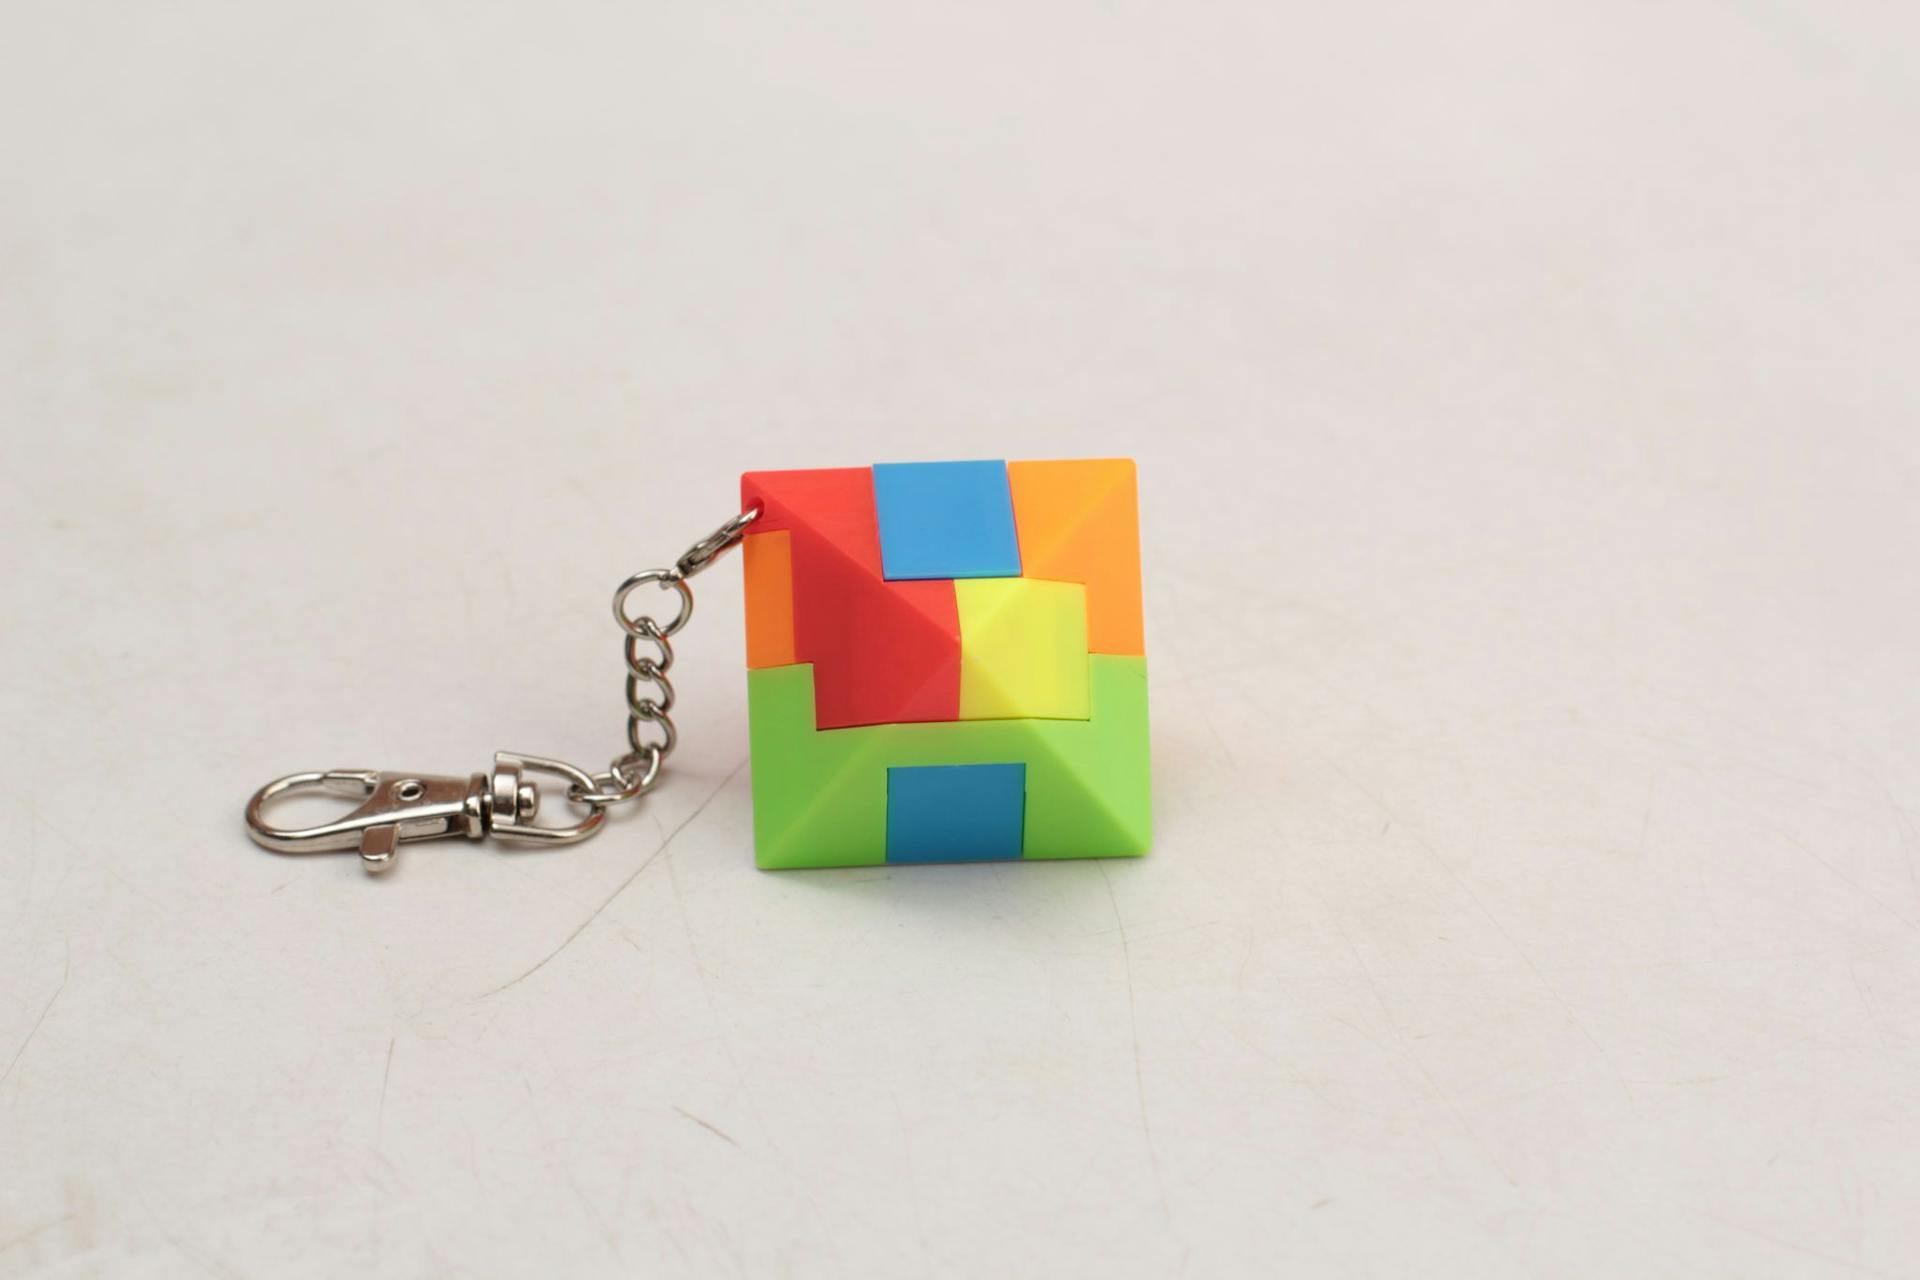 4-corner-only puzzle with keychain